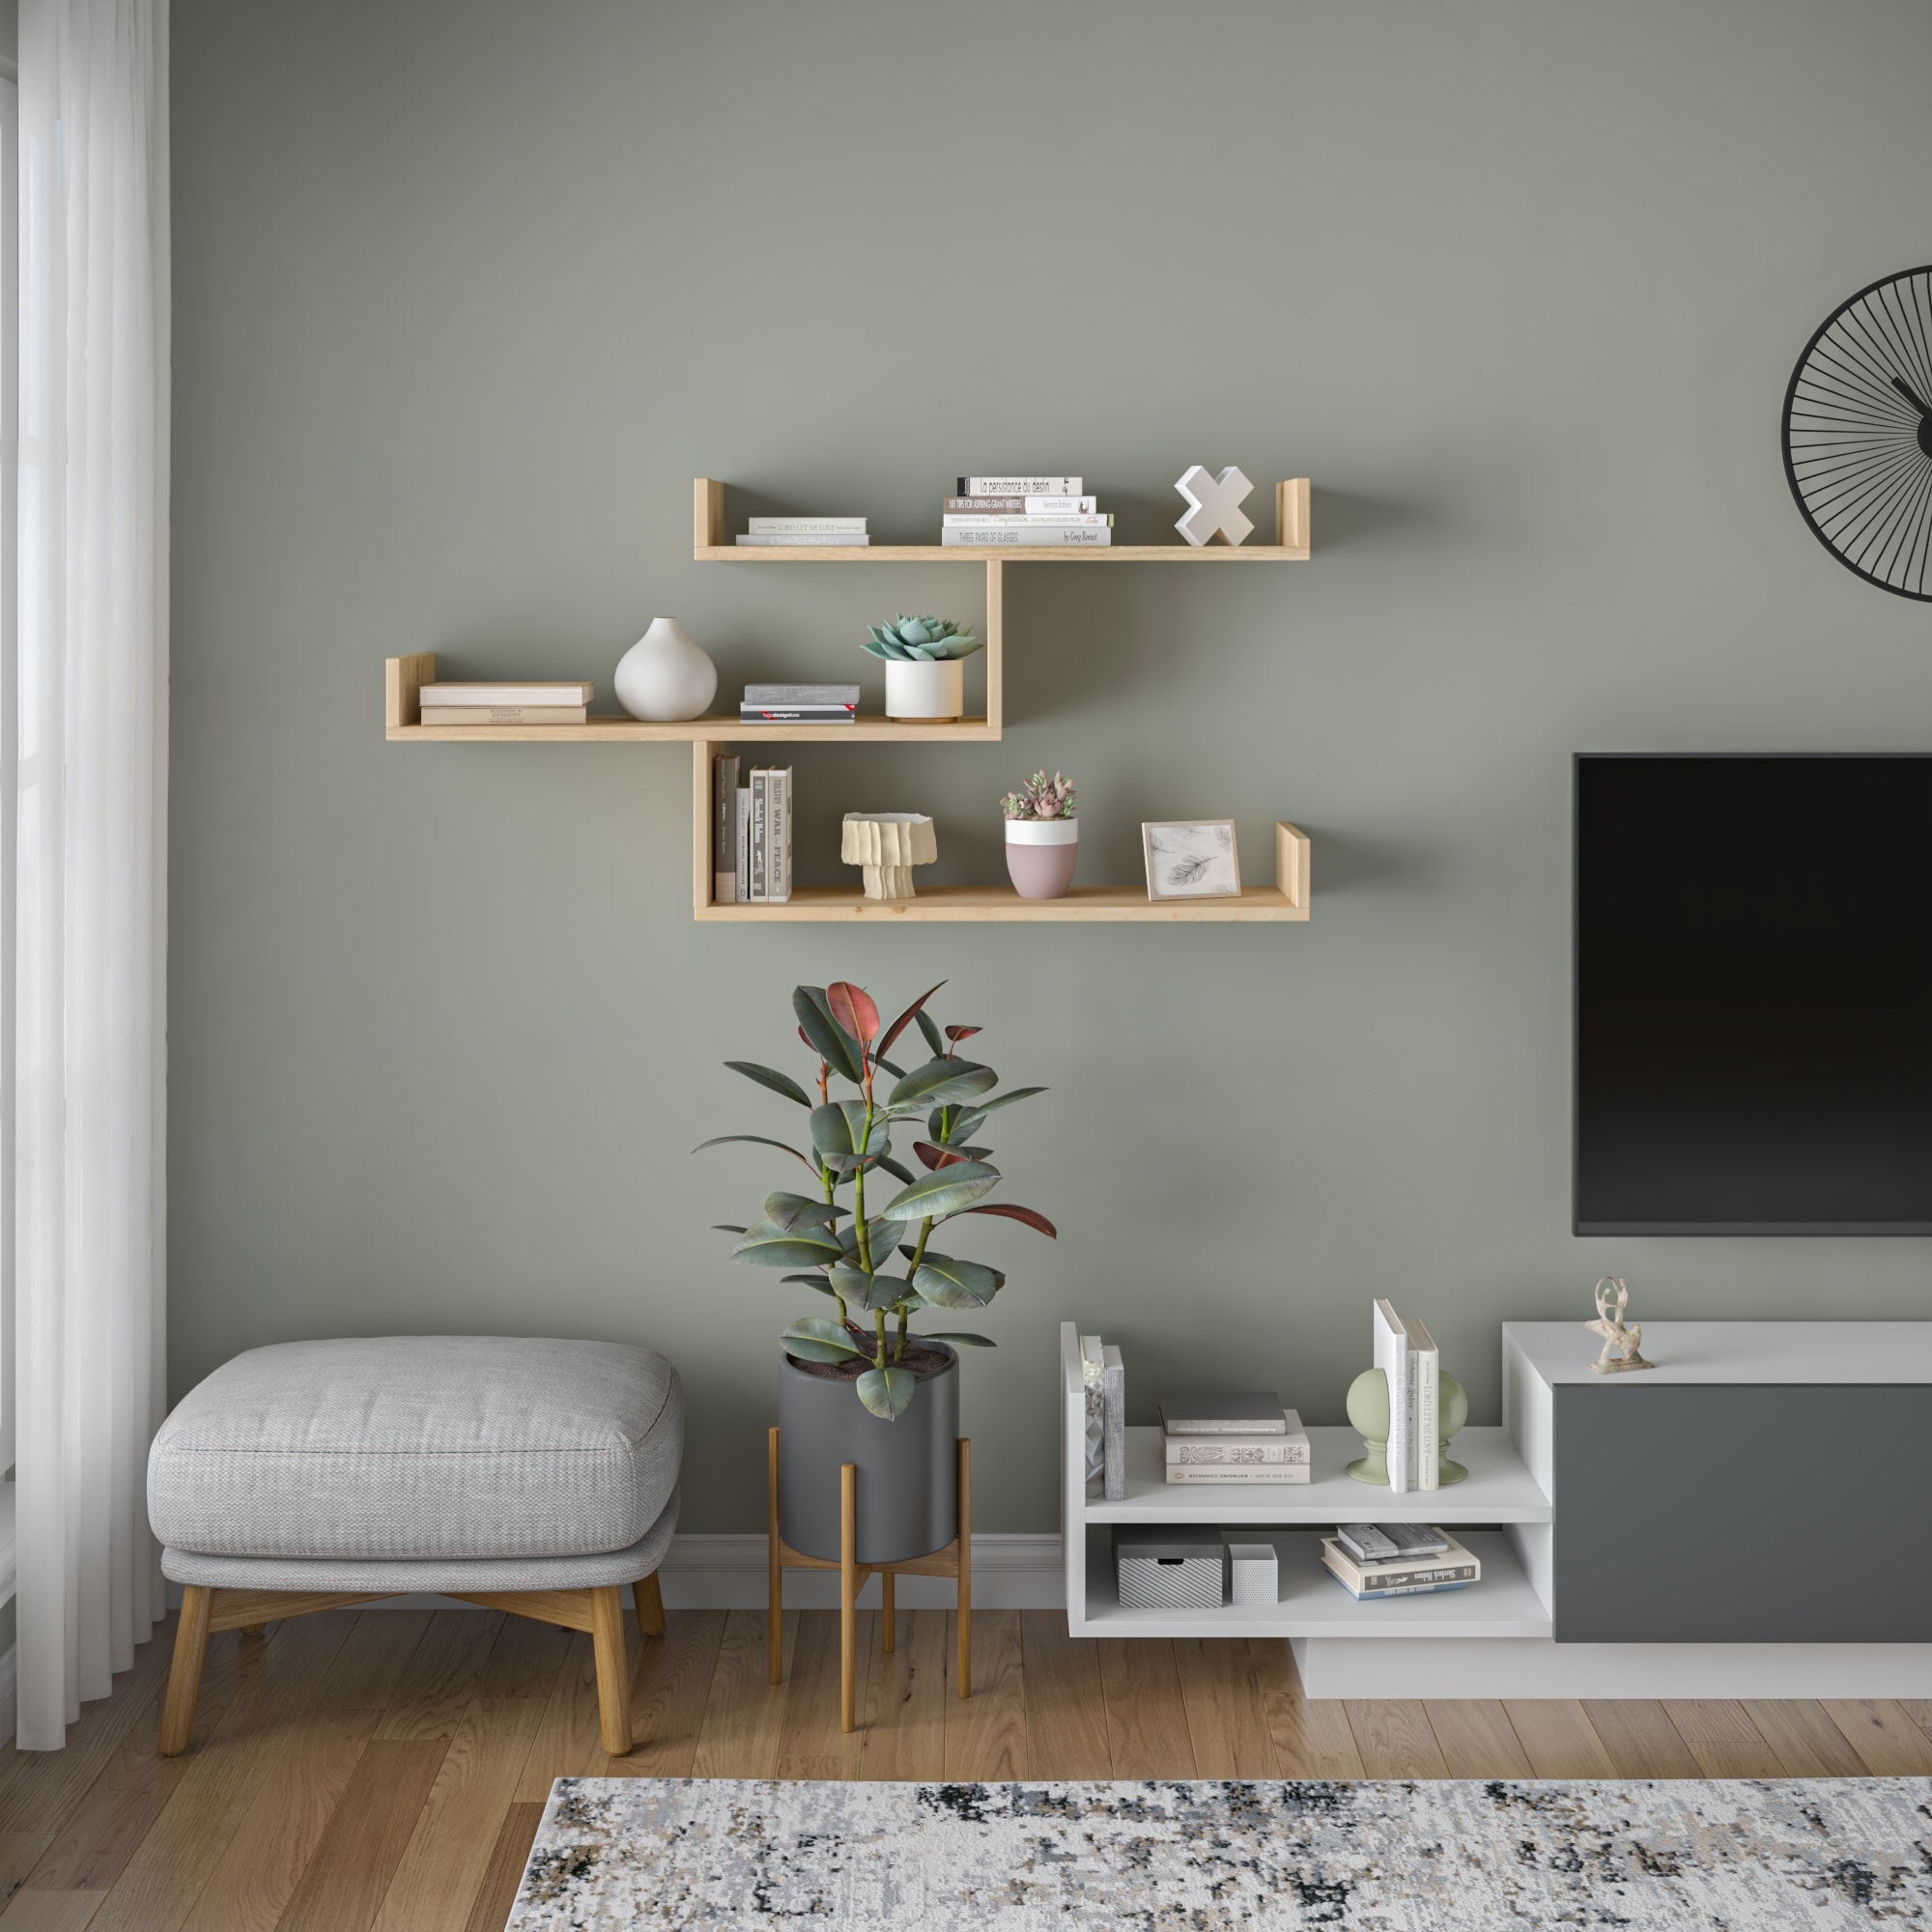 https://ak1.ostkcdn.com/images/products/is/images/direct/a36845f641e5caaa37305e9671bfef17d32ede35/Wilton-Modern-Wall-Shelf.jpg